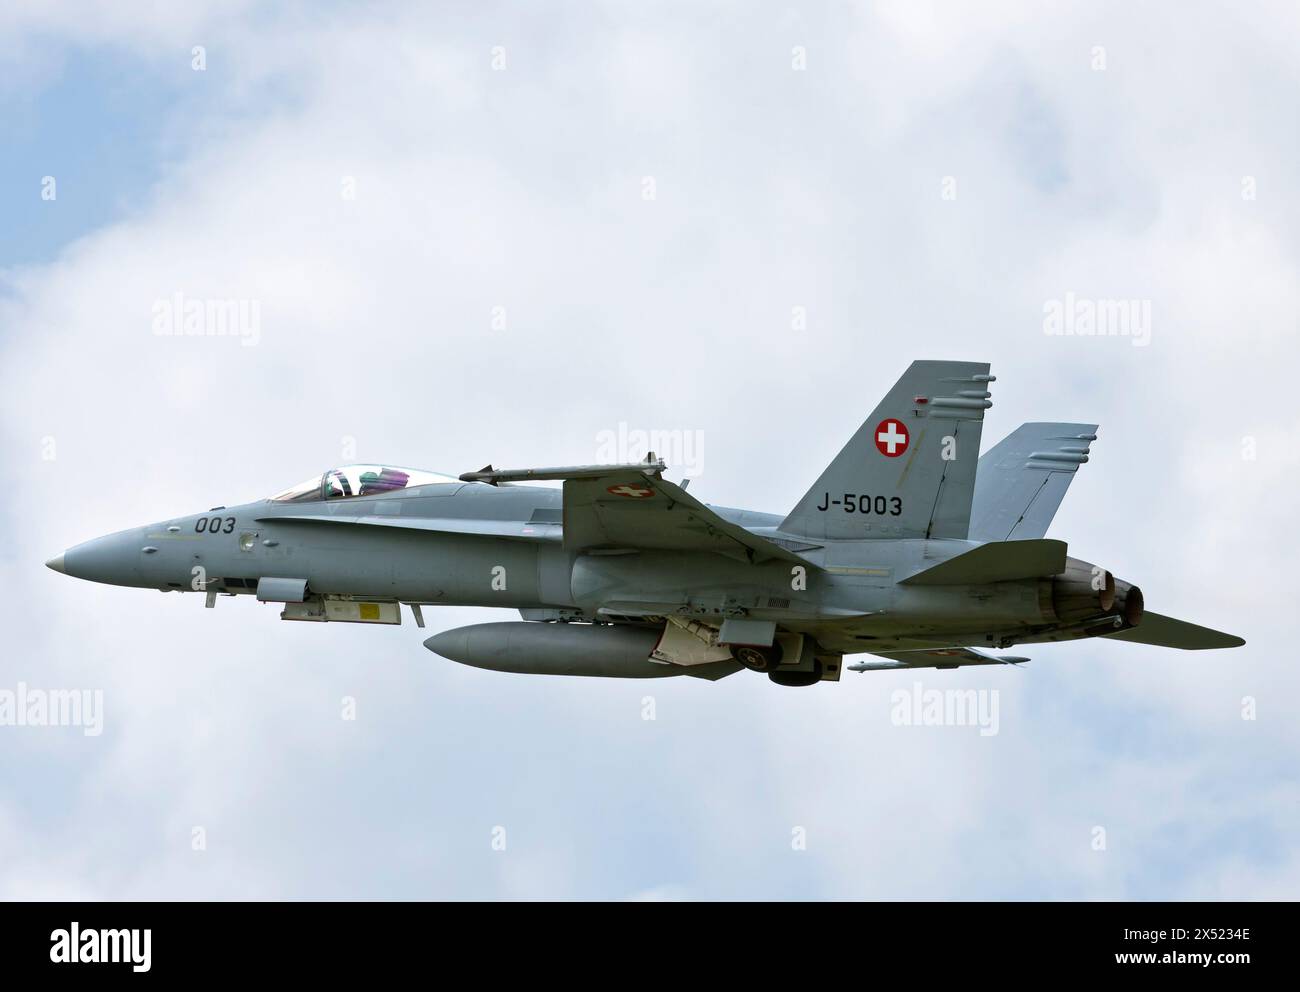 Twin-engine McDonnell Douglas F/A 18C Hornet multi-role fighter aircraft of the Swiss Air Force in flight, Payerne military airfield, Vaud,Switzerland Stock Photo